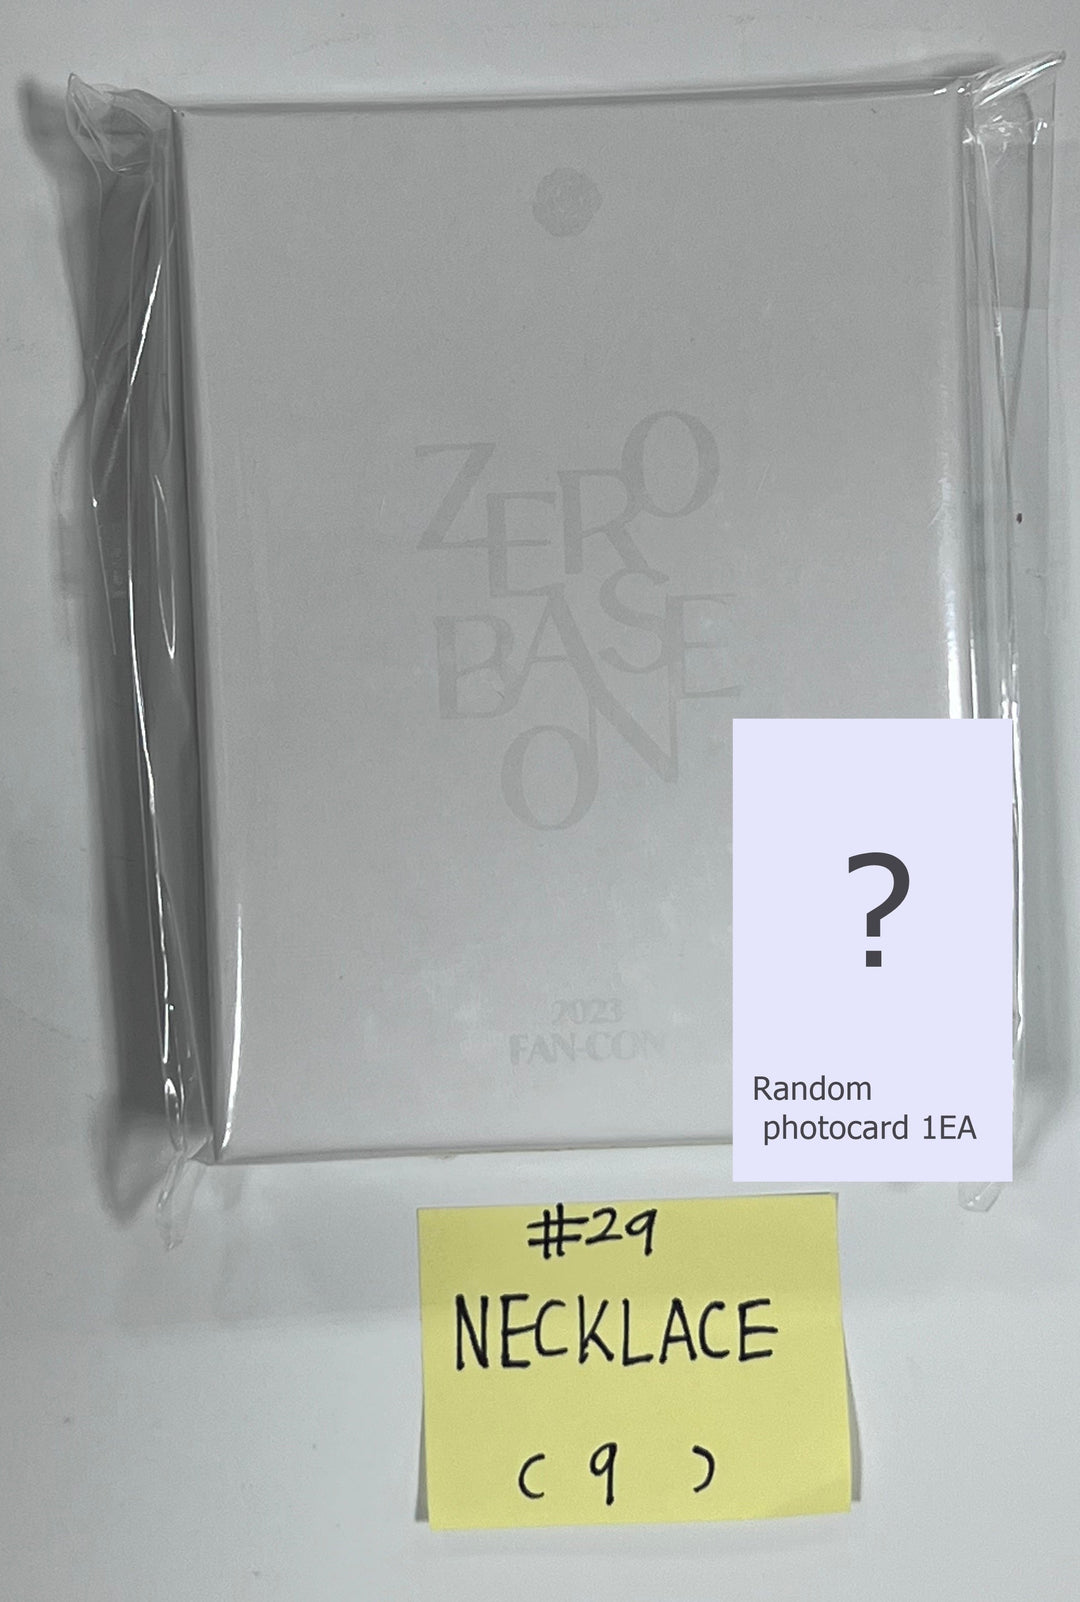 ZEROBASEONE (ZB1) ‘The Moving Seoul Pop-up Store’ - Official MD + FAN-CON MD [Updated 8/17]